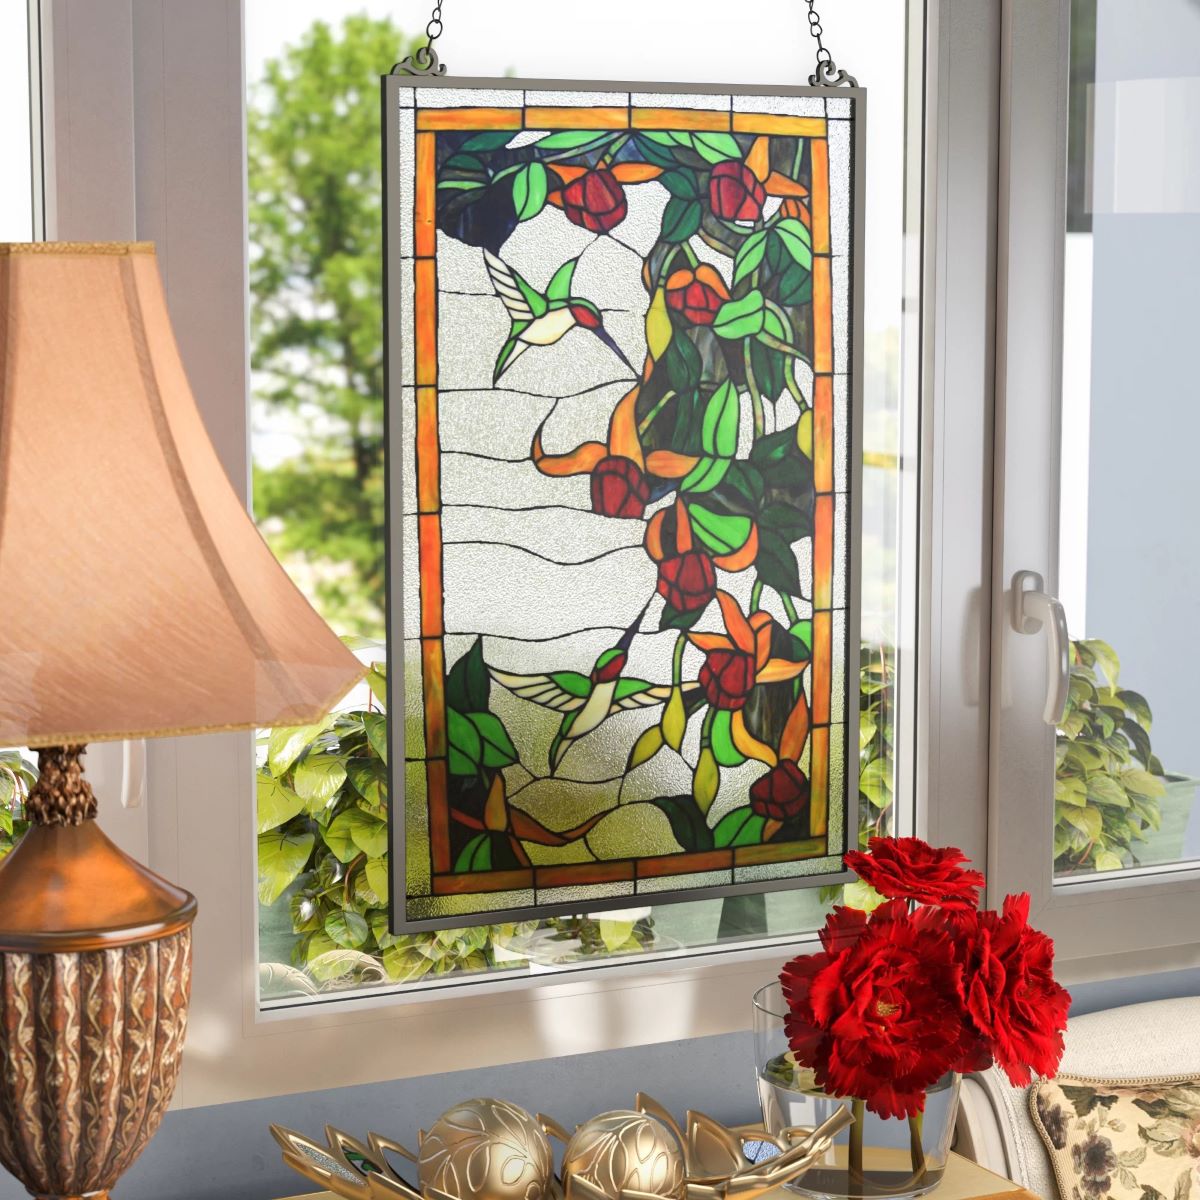 How To Hang Stained Glass